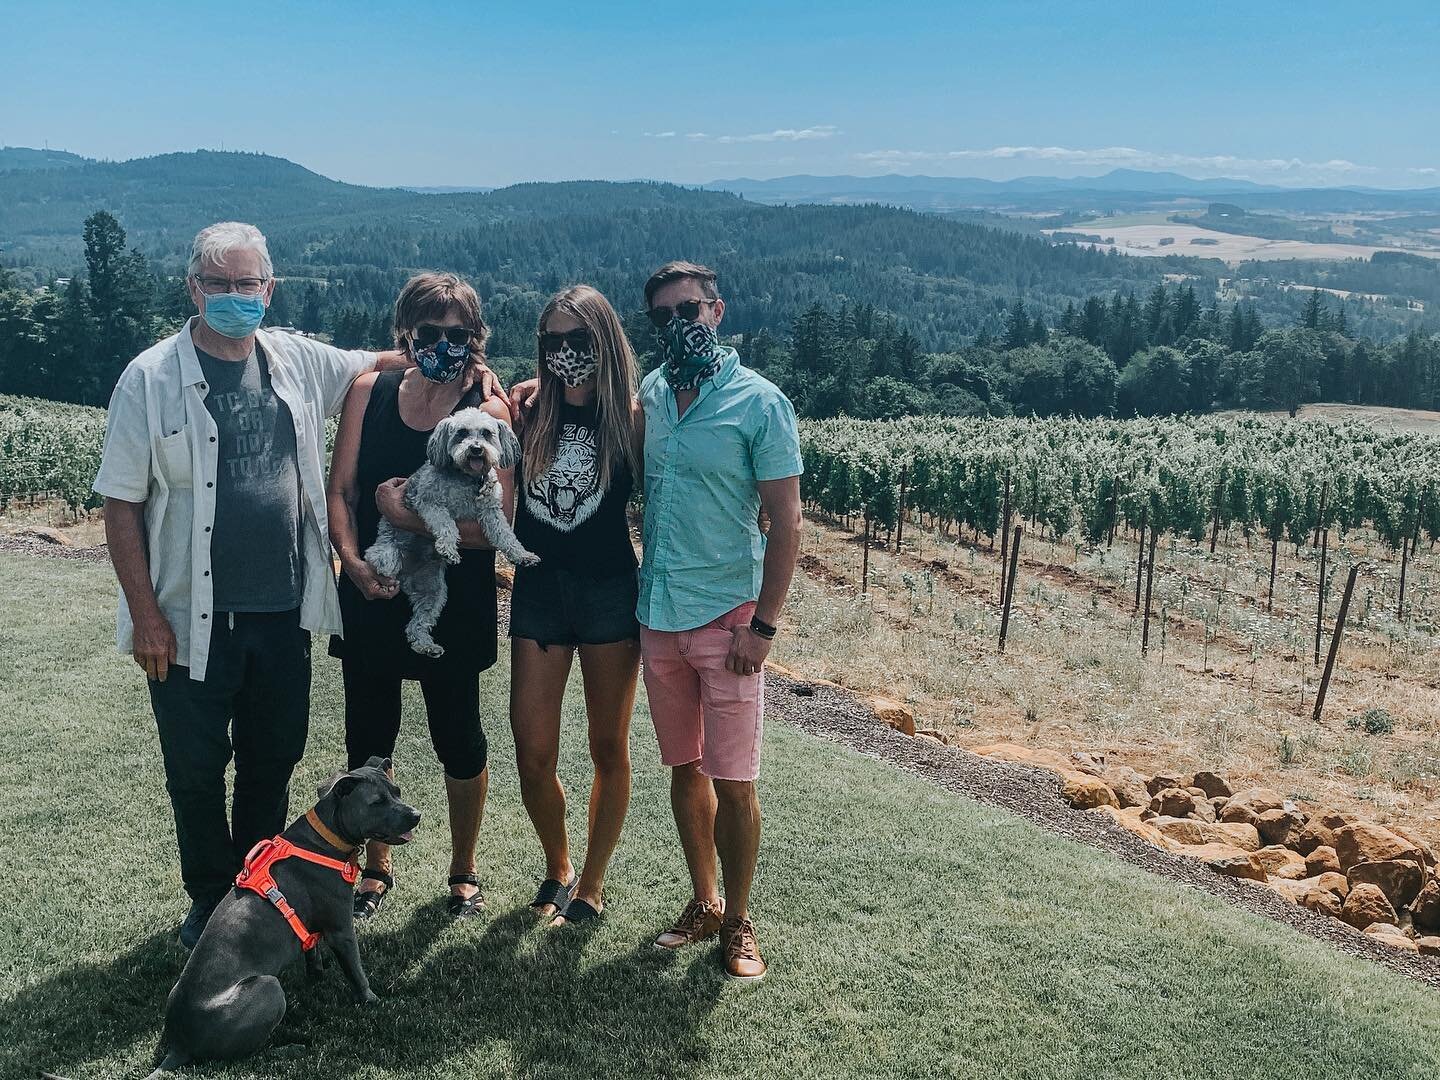 This was just last month on our road trip in Oregon wine country with my parents. 🥂 Crazy to think how different this skyline looks like now with the fires burning all around the area. 🔥 😭 My parents sent a photo of smoke covering the skies around